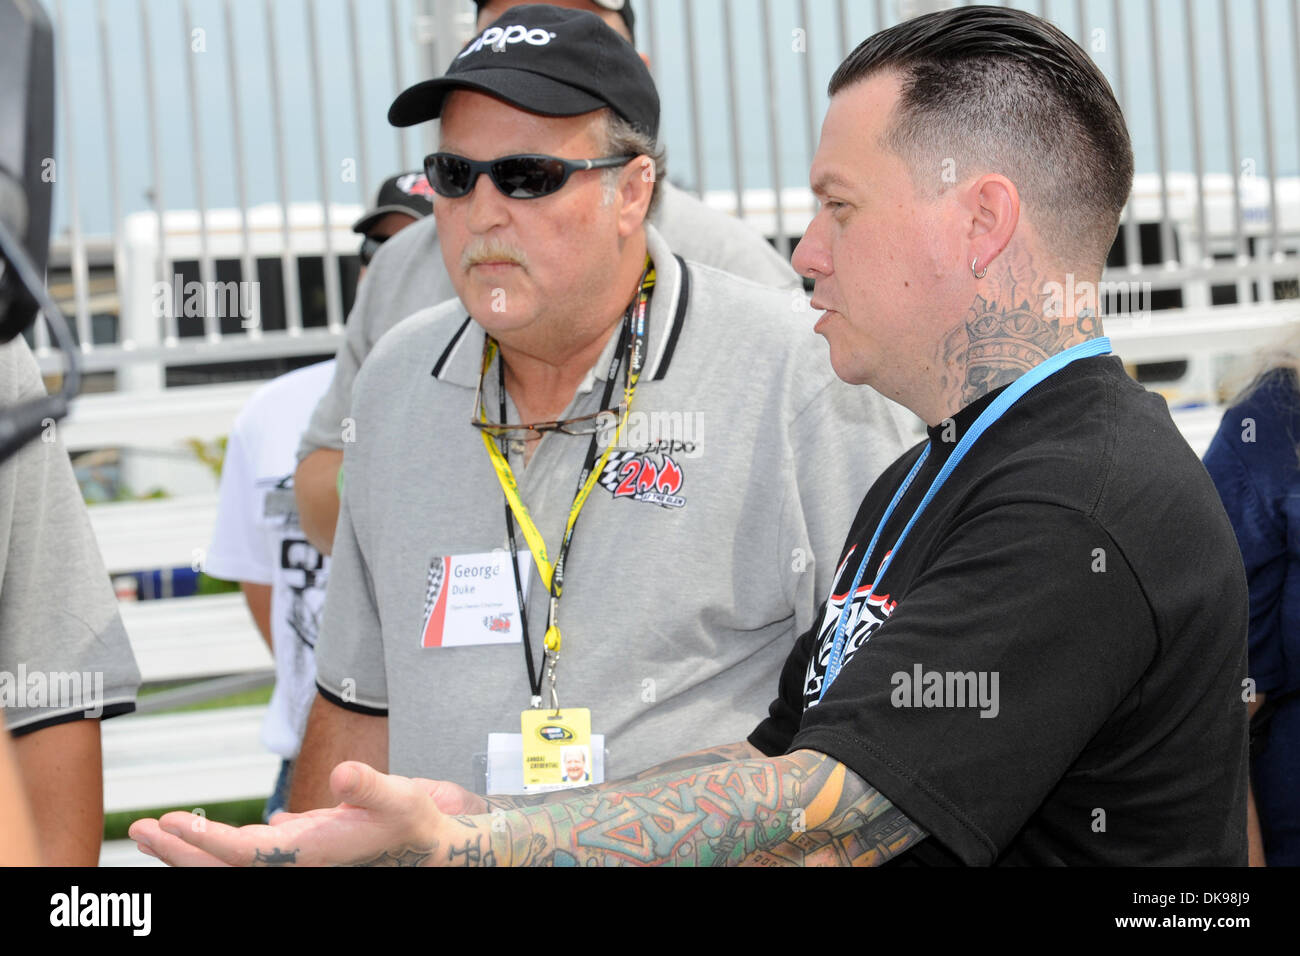 Aug. 13, 2011 - Watkins Glen, New York, U.S - West Custom's owner Ryan Friedlinghaus (right) show's off the Jeep that was custom made for Zippo to Zippo owner/chairman George Duke